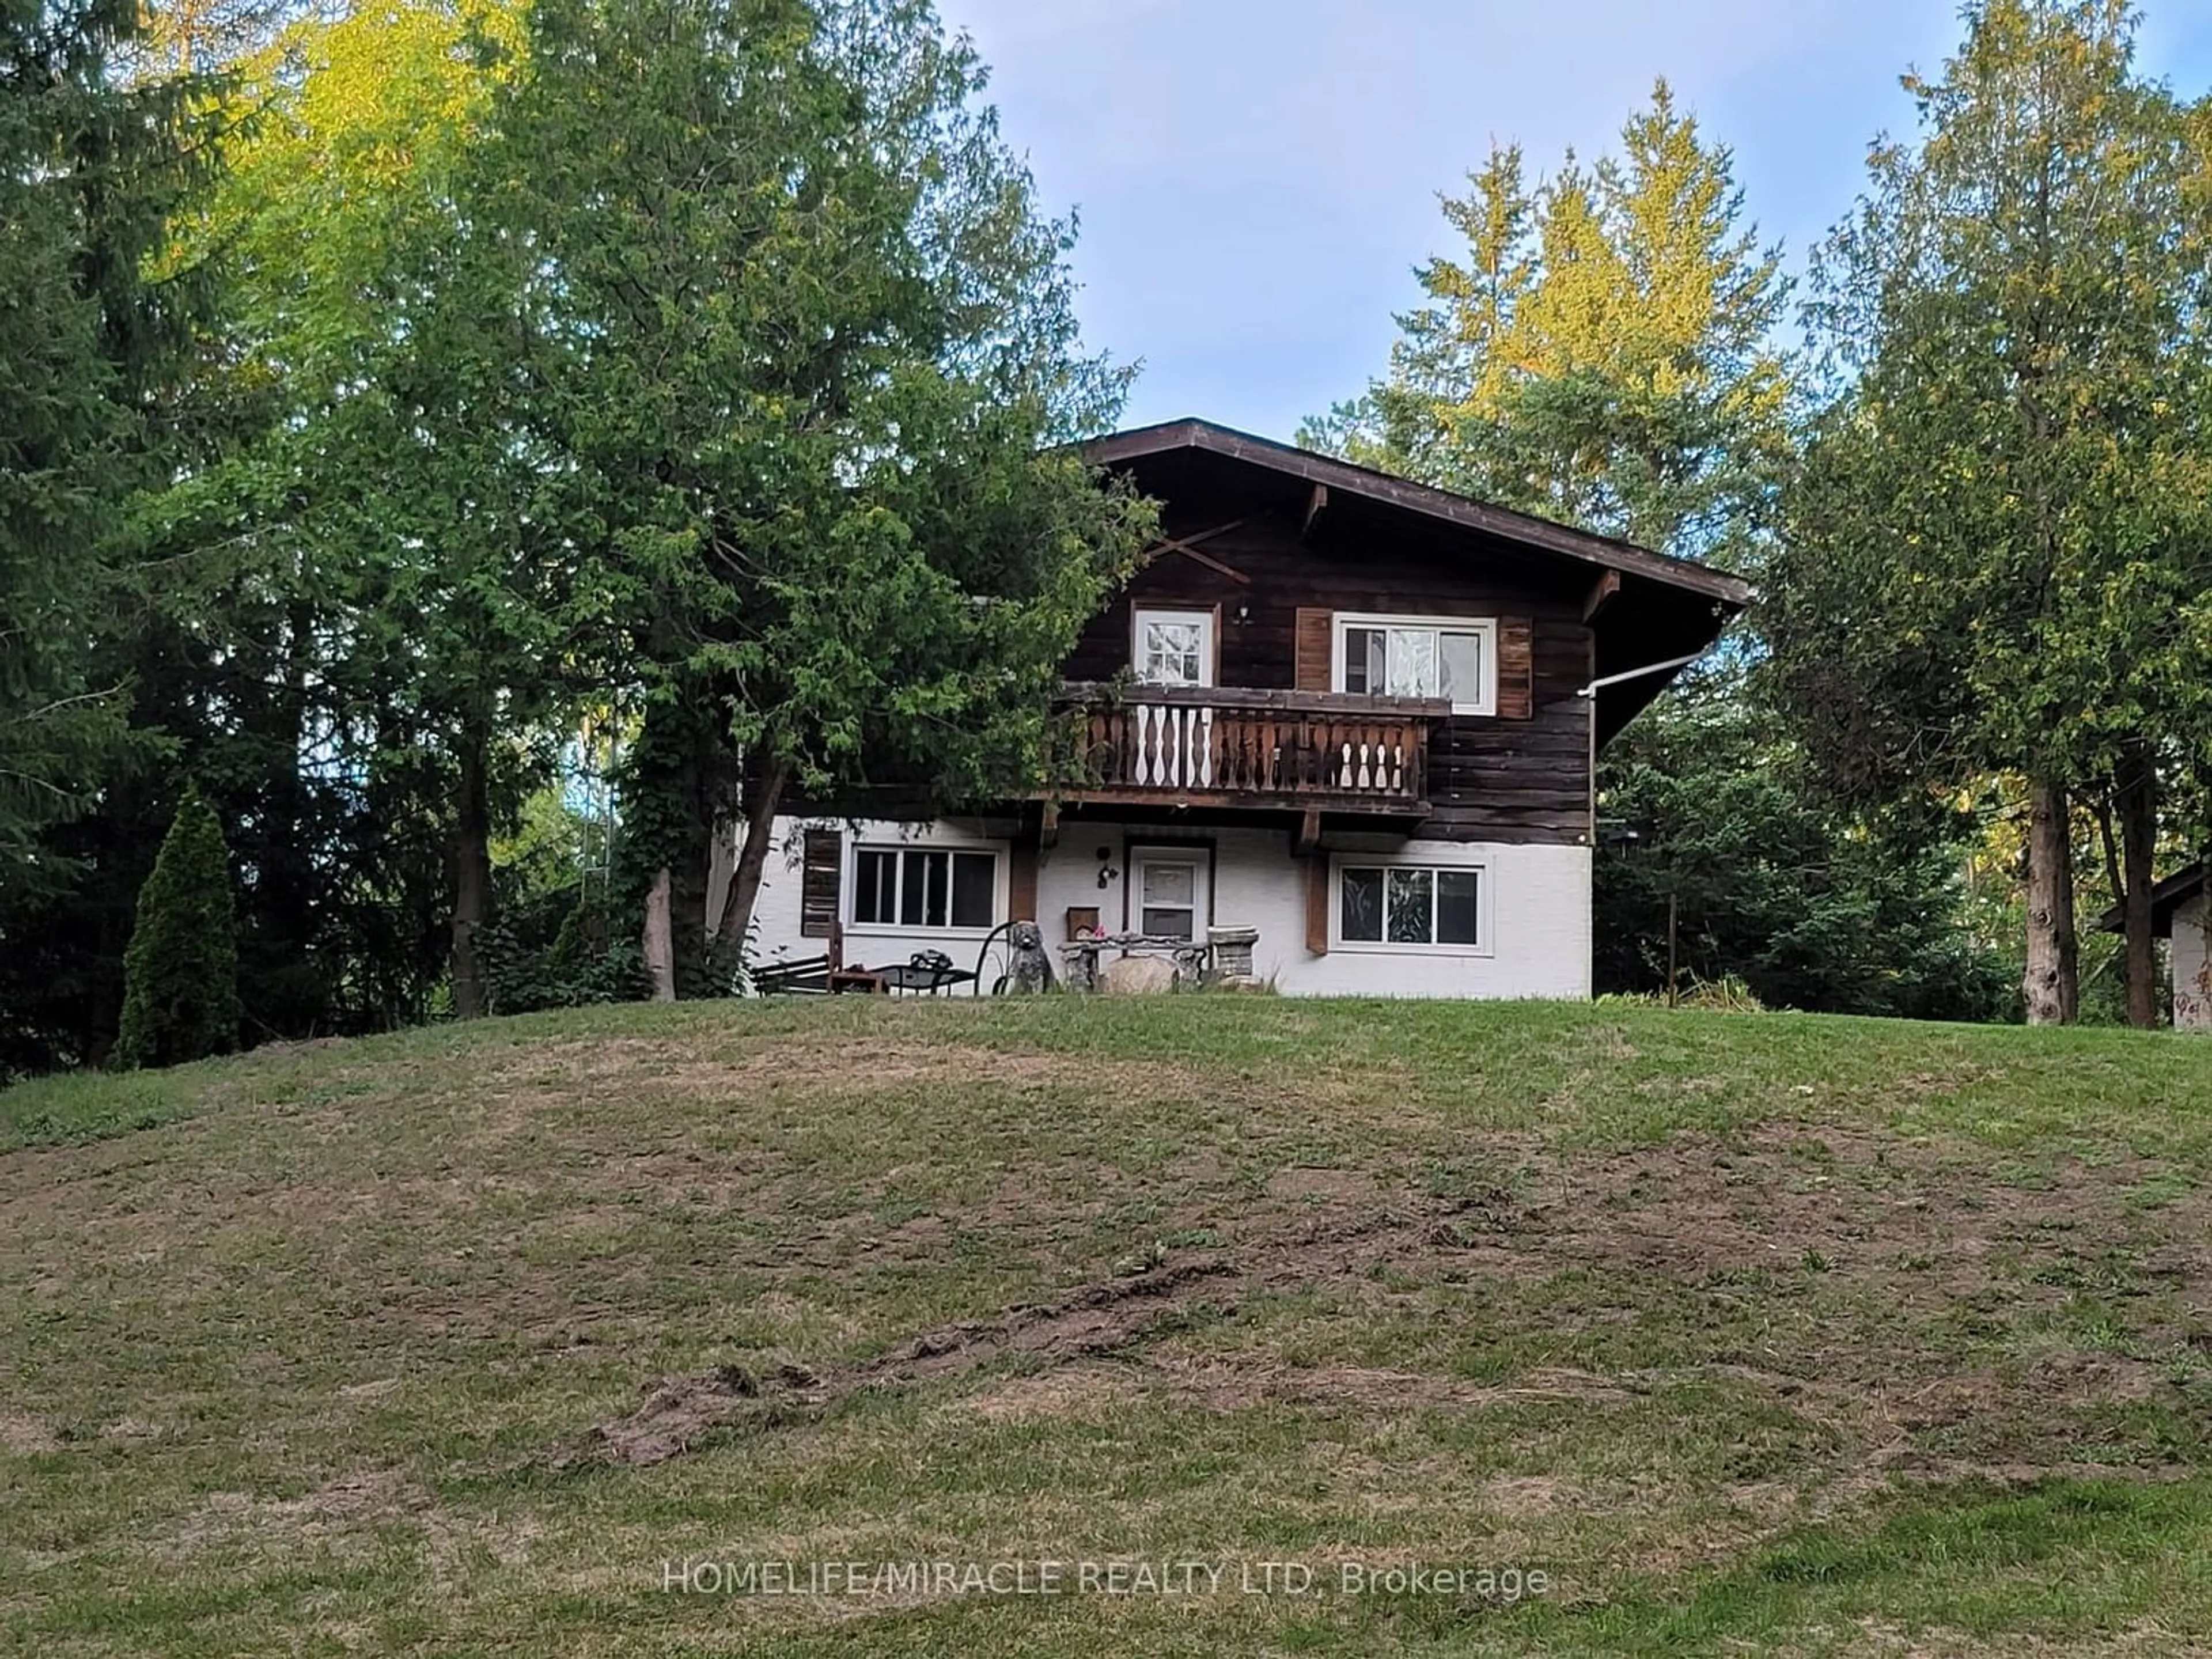 Frontside or backside of a home for 2472 Concession 3 Palgrave Rd, Adjala-Tosorontio Ontario L0N 1P0